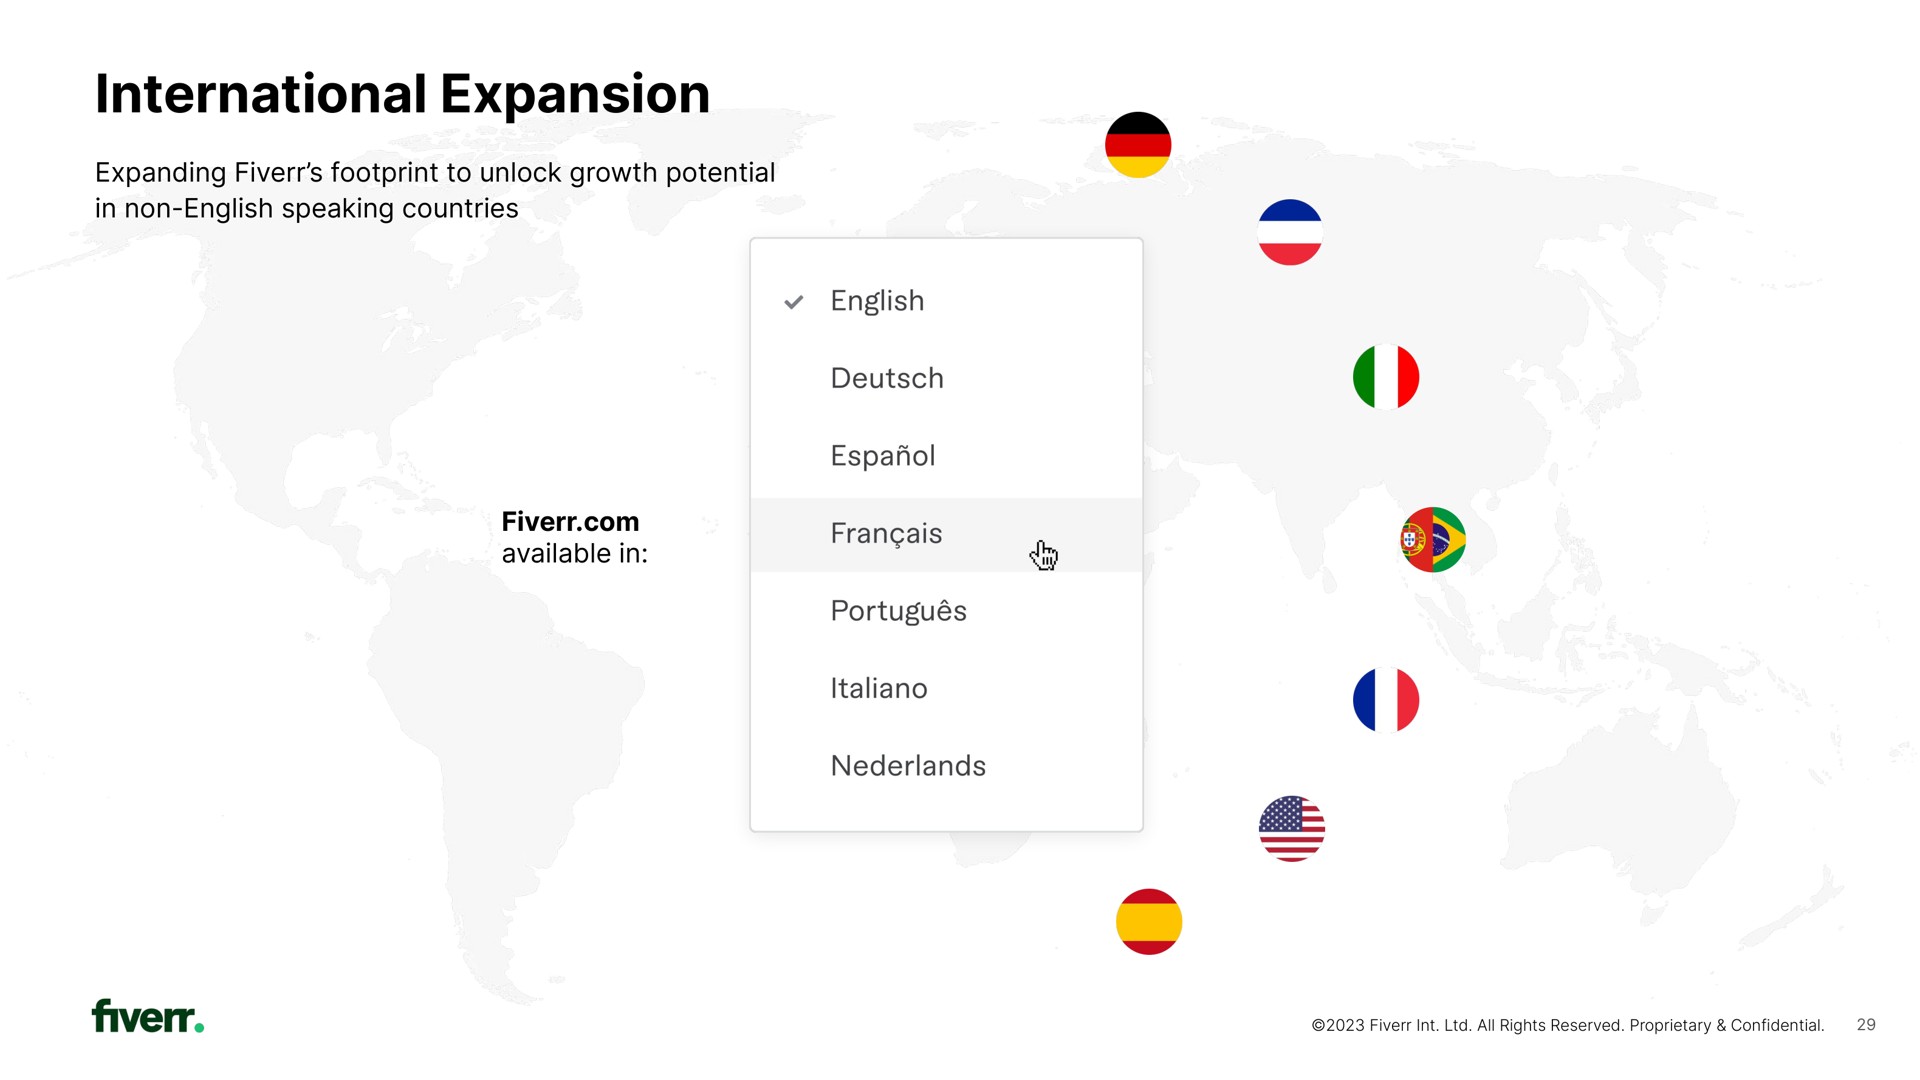 international expansion expanding footprint to unlock growth potential in non speaking countries available in | Fiverr